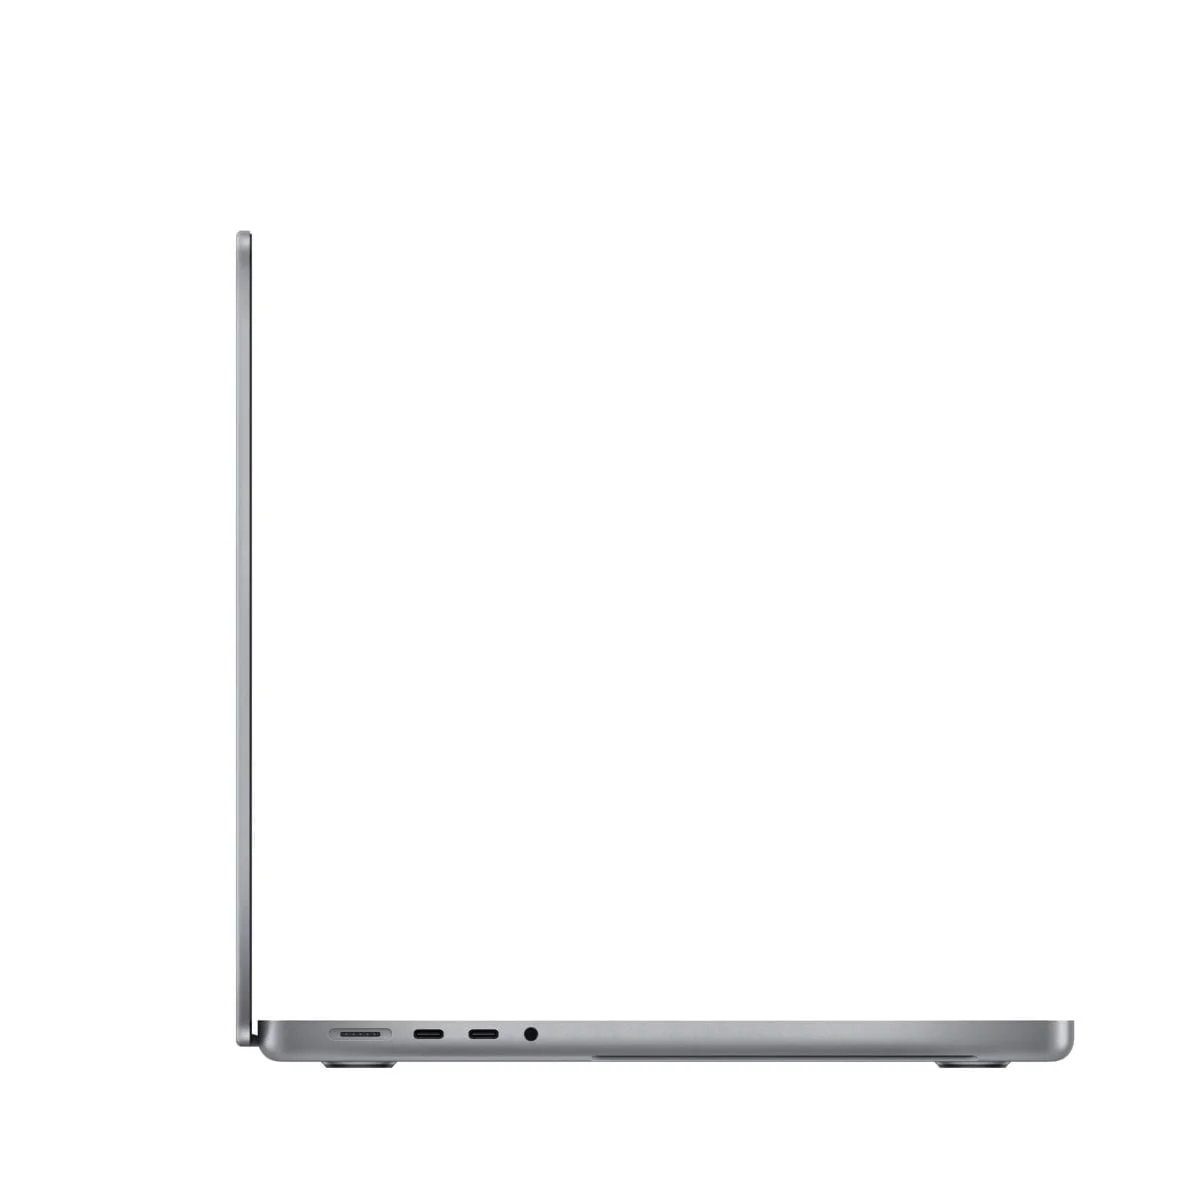 6450853Cv3D Apple &Lt;H1 Class=&Quot;A-Size-Large A-Spacing-None&Quot;&Gt;&Lt;Span Class=&Quot;A-Size-Large Product-Title-Word-Break&Quot;&Gt;Macbook Pro 16&Quot; Laptop - Apple M1 Max Chip - 32Gb Memory - 1Tb Ssd (Latest Model) - Space Gray &Lt;/Span&Gt;&Lt;Span Id=&Quot;Producttitle&Quot; Class=&Quot;A-Size-Large Product-Title-Word-Break&Quot;&Gt;(English Keyboard)&Lt;/Span&Gt;&Lt;/H1&Gt; &Lt;Span Class=&Quot;A-Size-Large Product-Title-Word-Break&Quot;&Gt;Https://Www.youtube.com/Watch?V=9Tobl8U7Dqo &Lt;/Span&Gt; &Lt;Span Style=&Quot;Color: #040C13; Font-Family: 'Human Bby Digital', 'Human Fallback', Arial, Helvetica, Sans-Serif; Font-Size: 13Px;&Quot;&Gt;The New Macbook Pro Delivers Game-Changing Performance For Pro Users. Choose The Powerful M1 Pro Or The Even More Powerful M1 Max To Supercharge Pro-Level Workflows While Getting Amazing Battery Life.¹ And With An Immersive 16-Inch Liquid Retina Xdr Display And An Array Of Pro Ports, You Can Do More Than Ever With Macbook Pro&Lt;/Span&Gt; Macbook Pro Macbook Pro 16&Quot; Laptop - Apple M1 Max Chip - 32Gb Memory - 1Tb Ssd (Mk1A3) - Space Gray